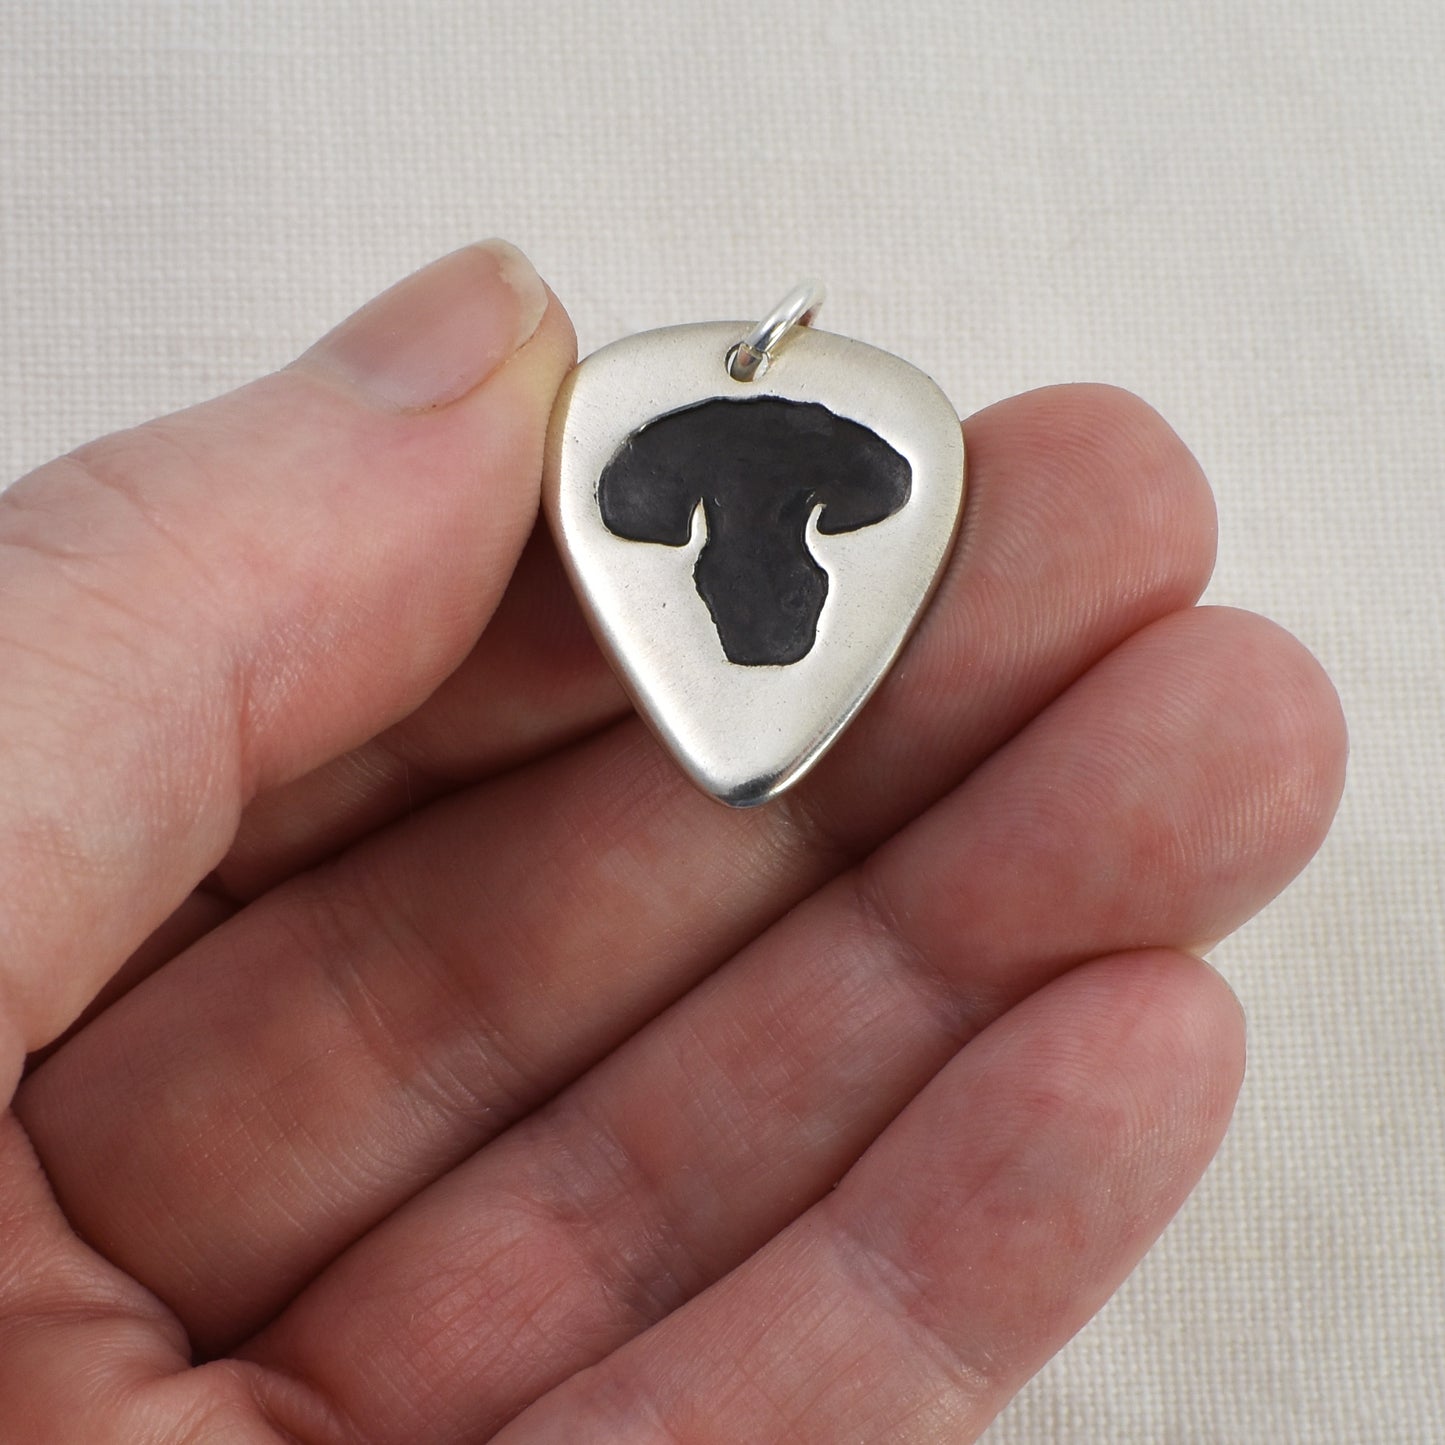 Dog Nose Guitar Pick Pendant Shown being Held for size reference